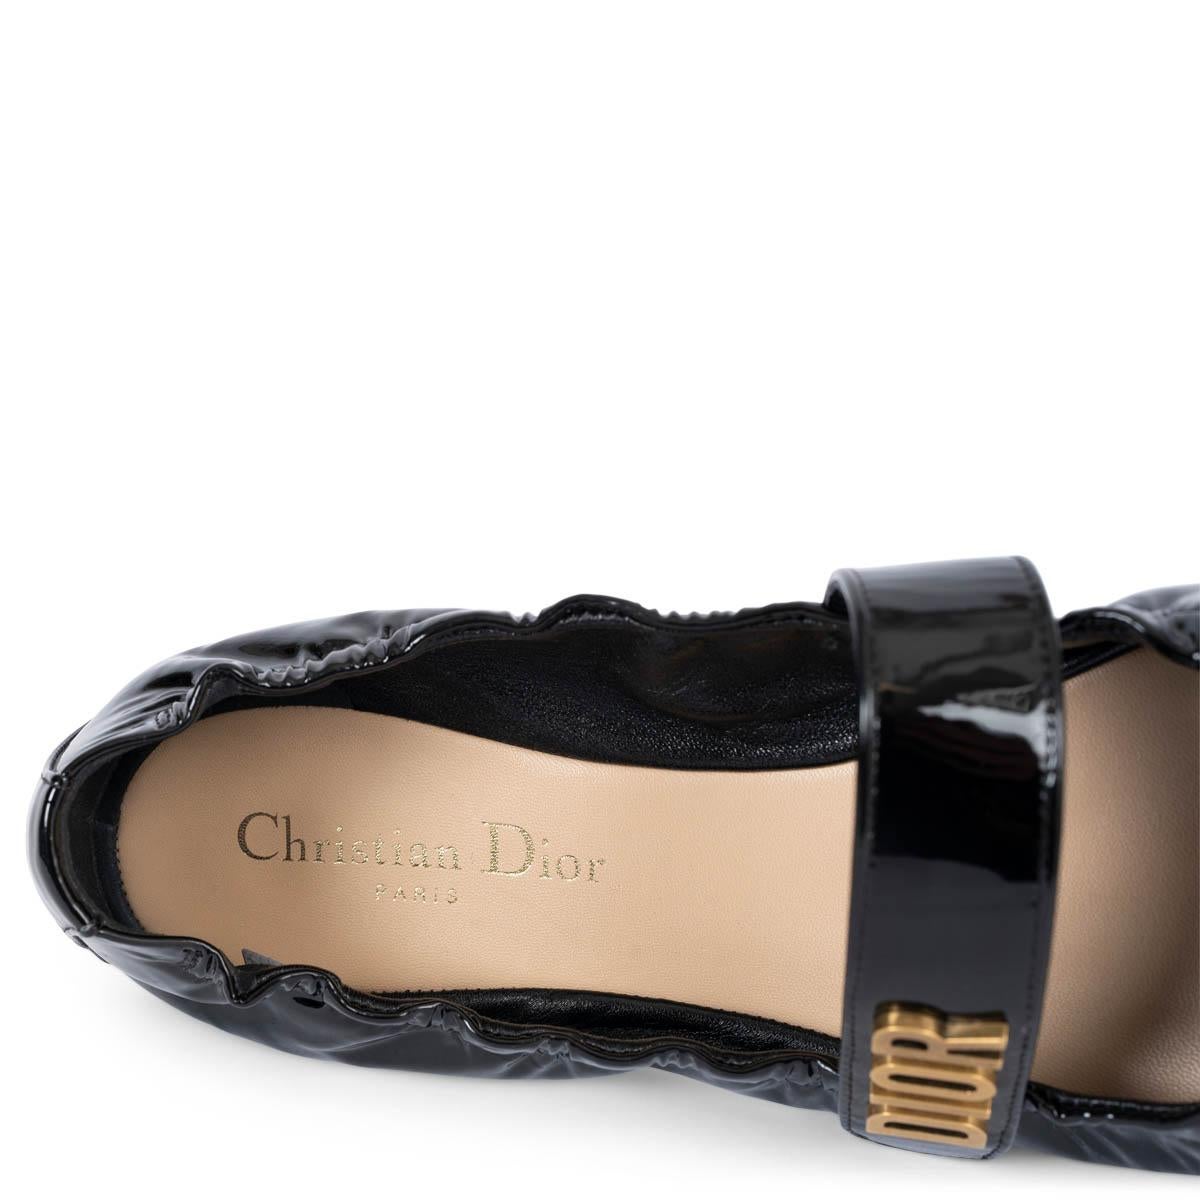 CHRISTIAN DIOR black patent leather BABY-D BALLET Flats Shoes 39 3